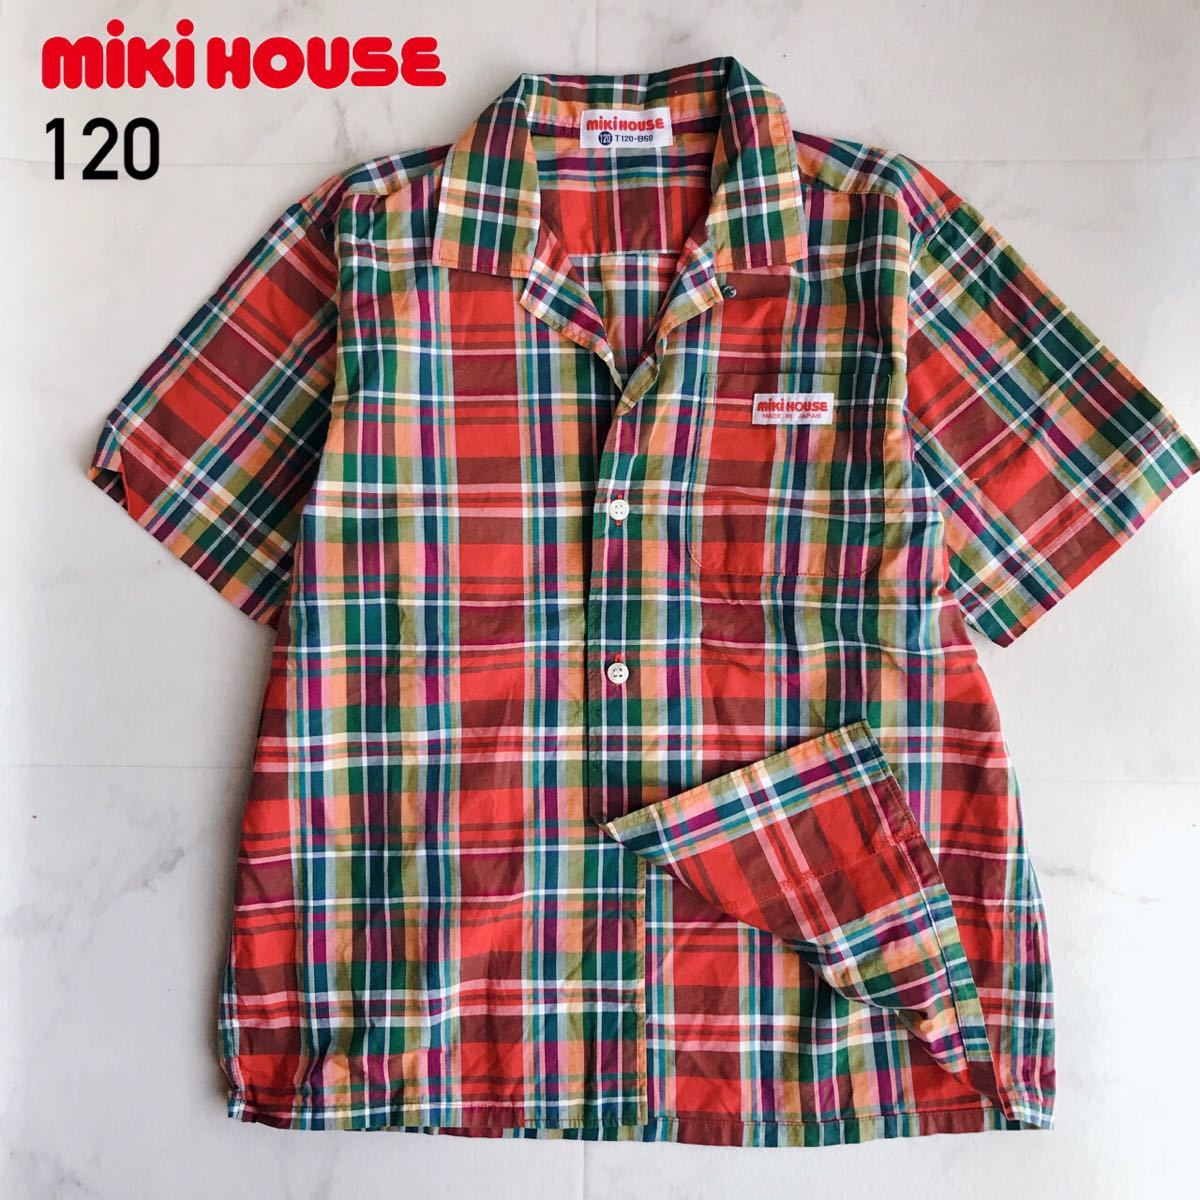 # postage included # prompt decision # beautiful goods 120 MIKIHOUSE Miki House retro short sleeves noba check shirt Logo red made in Japan man rare Vintage old tag 